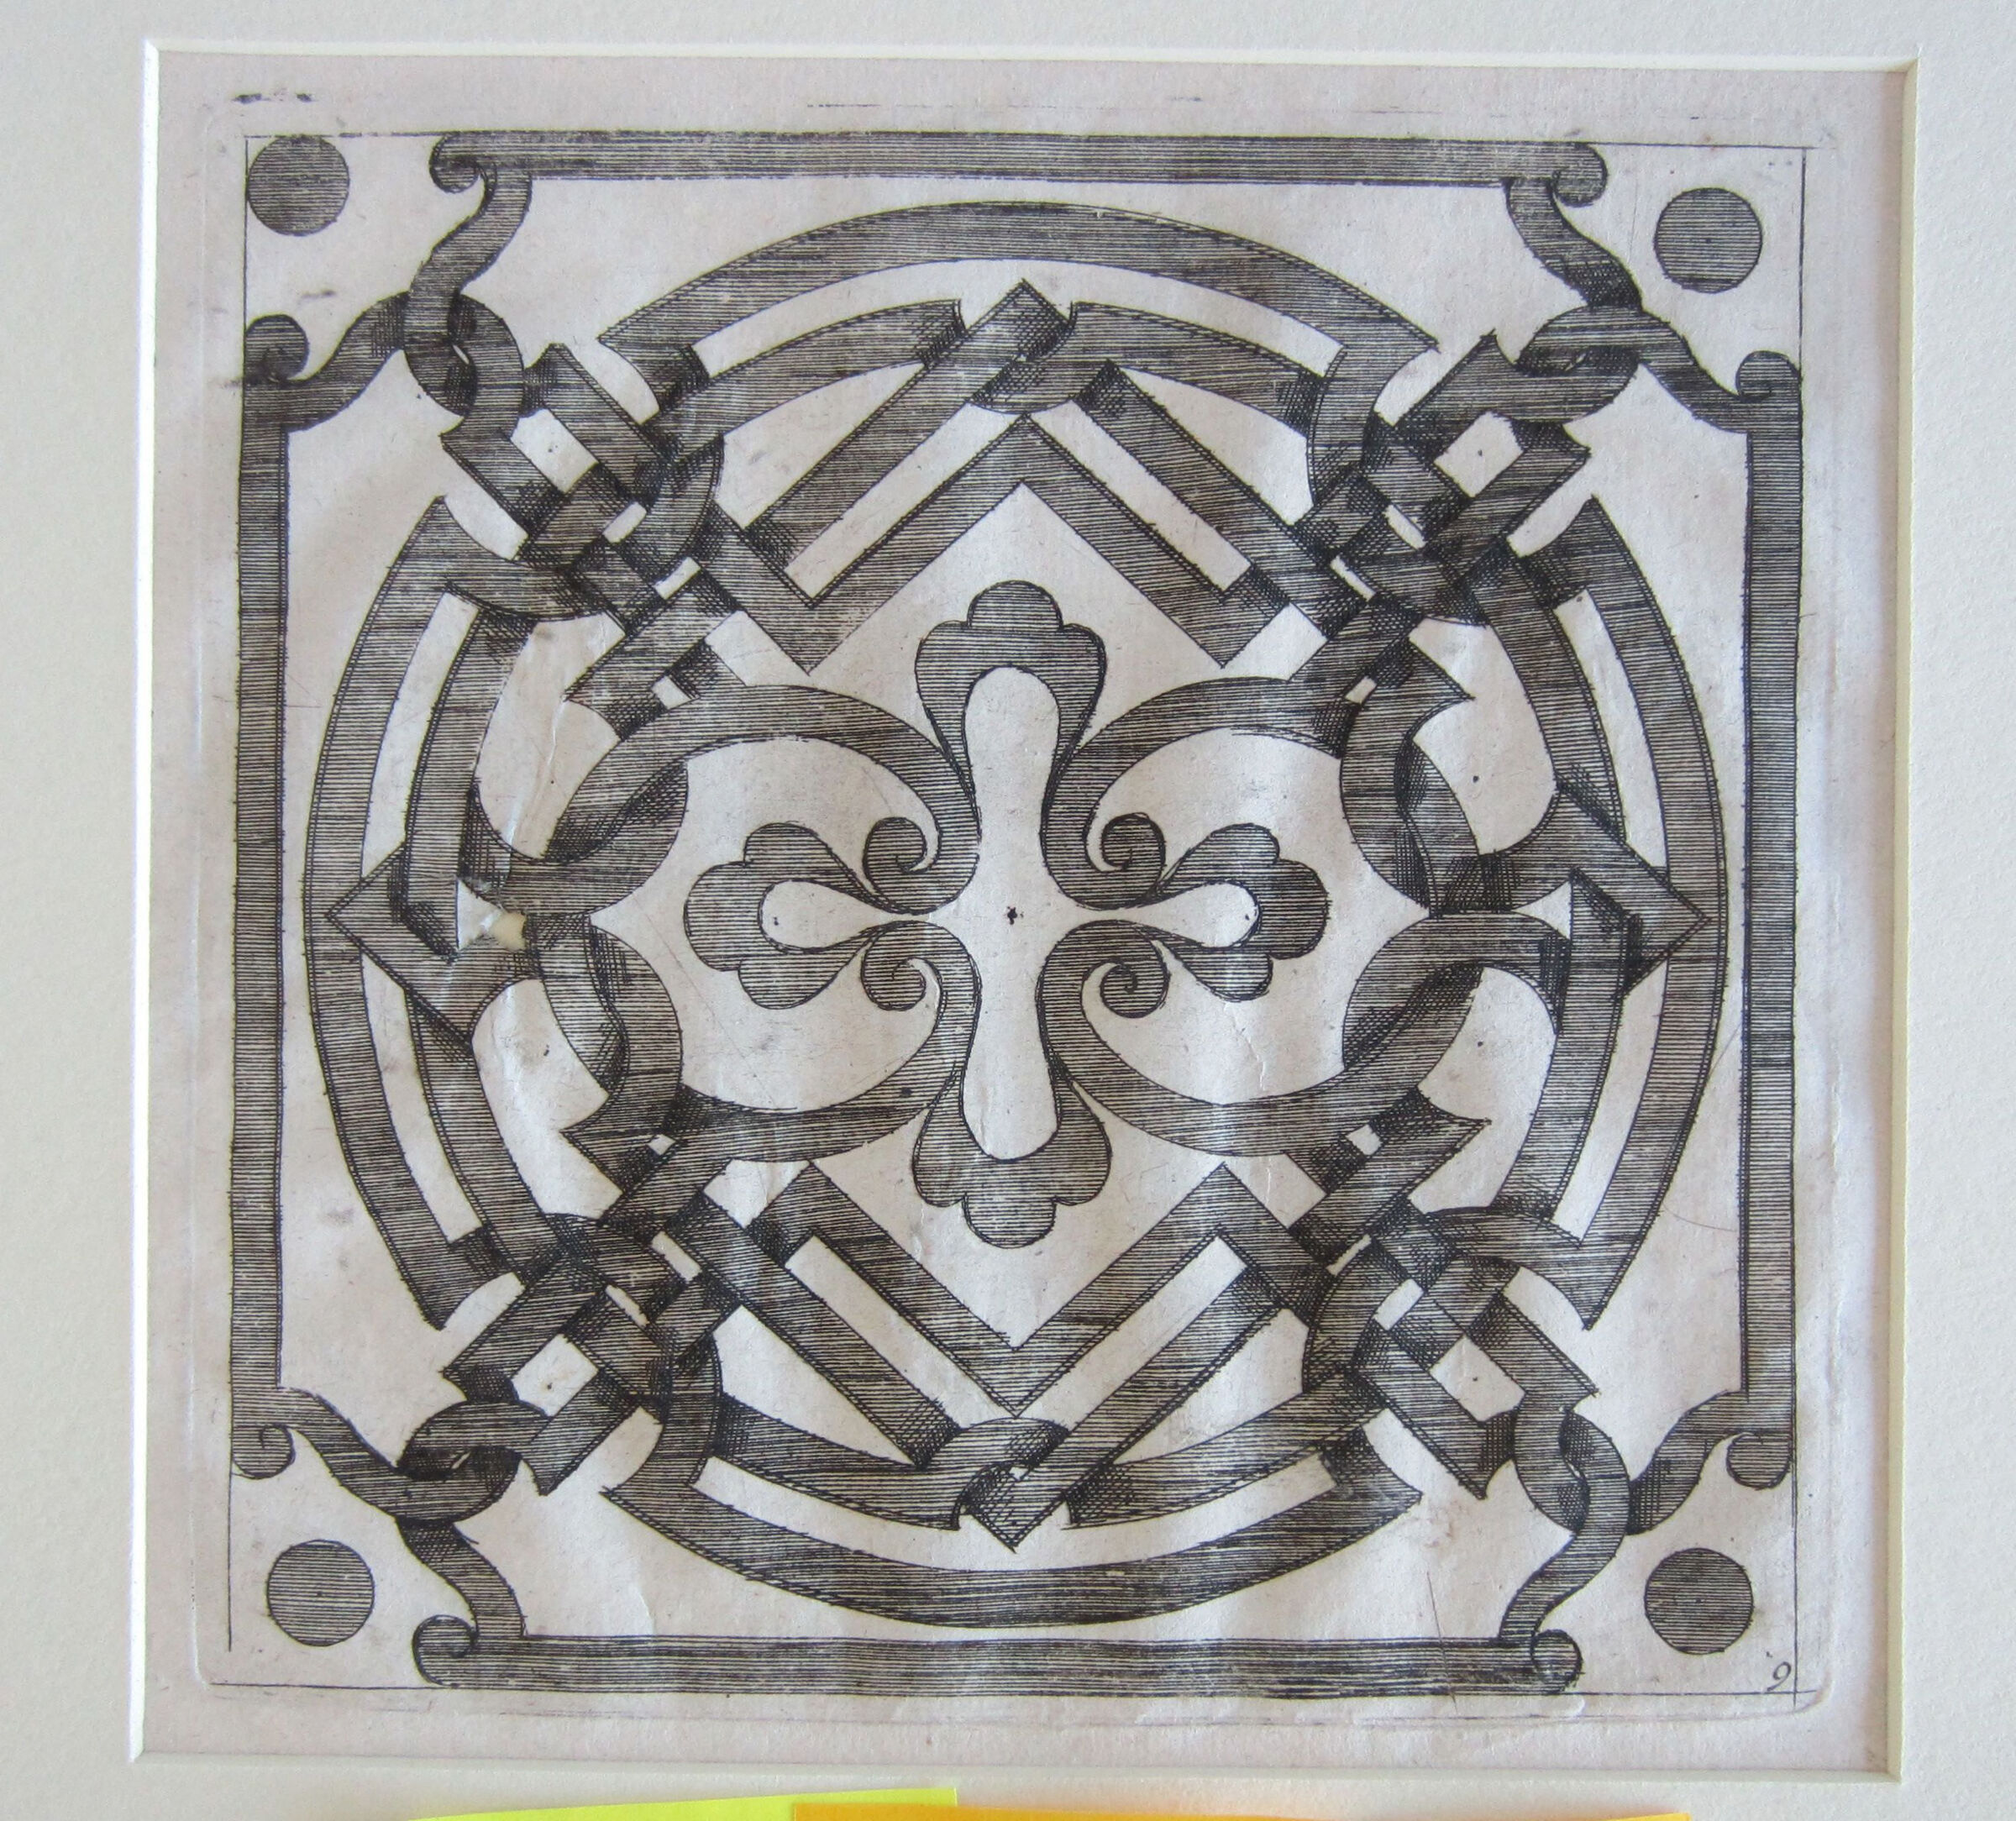 Interlace Centered By A Cross-Shaped Motif, Circles At The Plate Corners